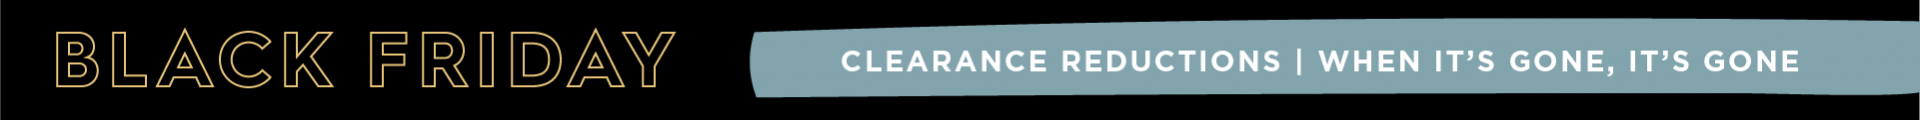 Black Friday Clearance Banner